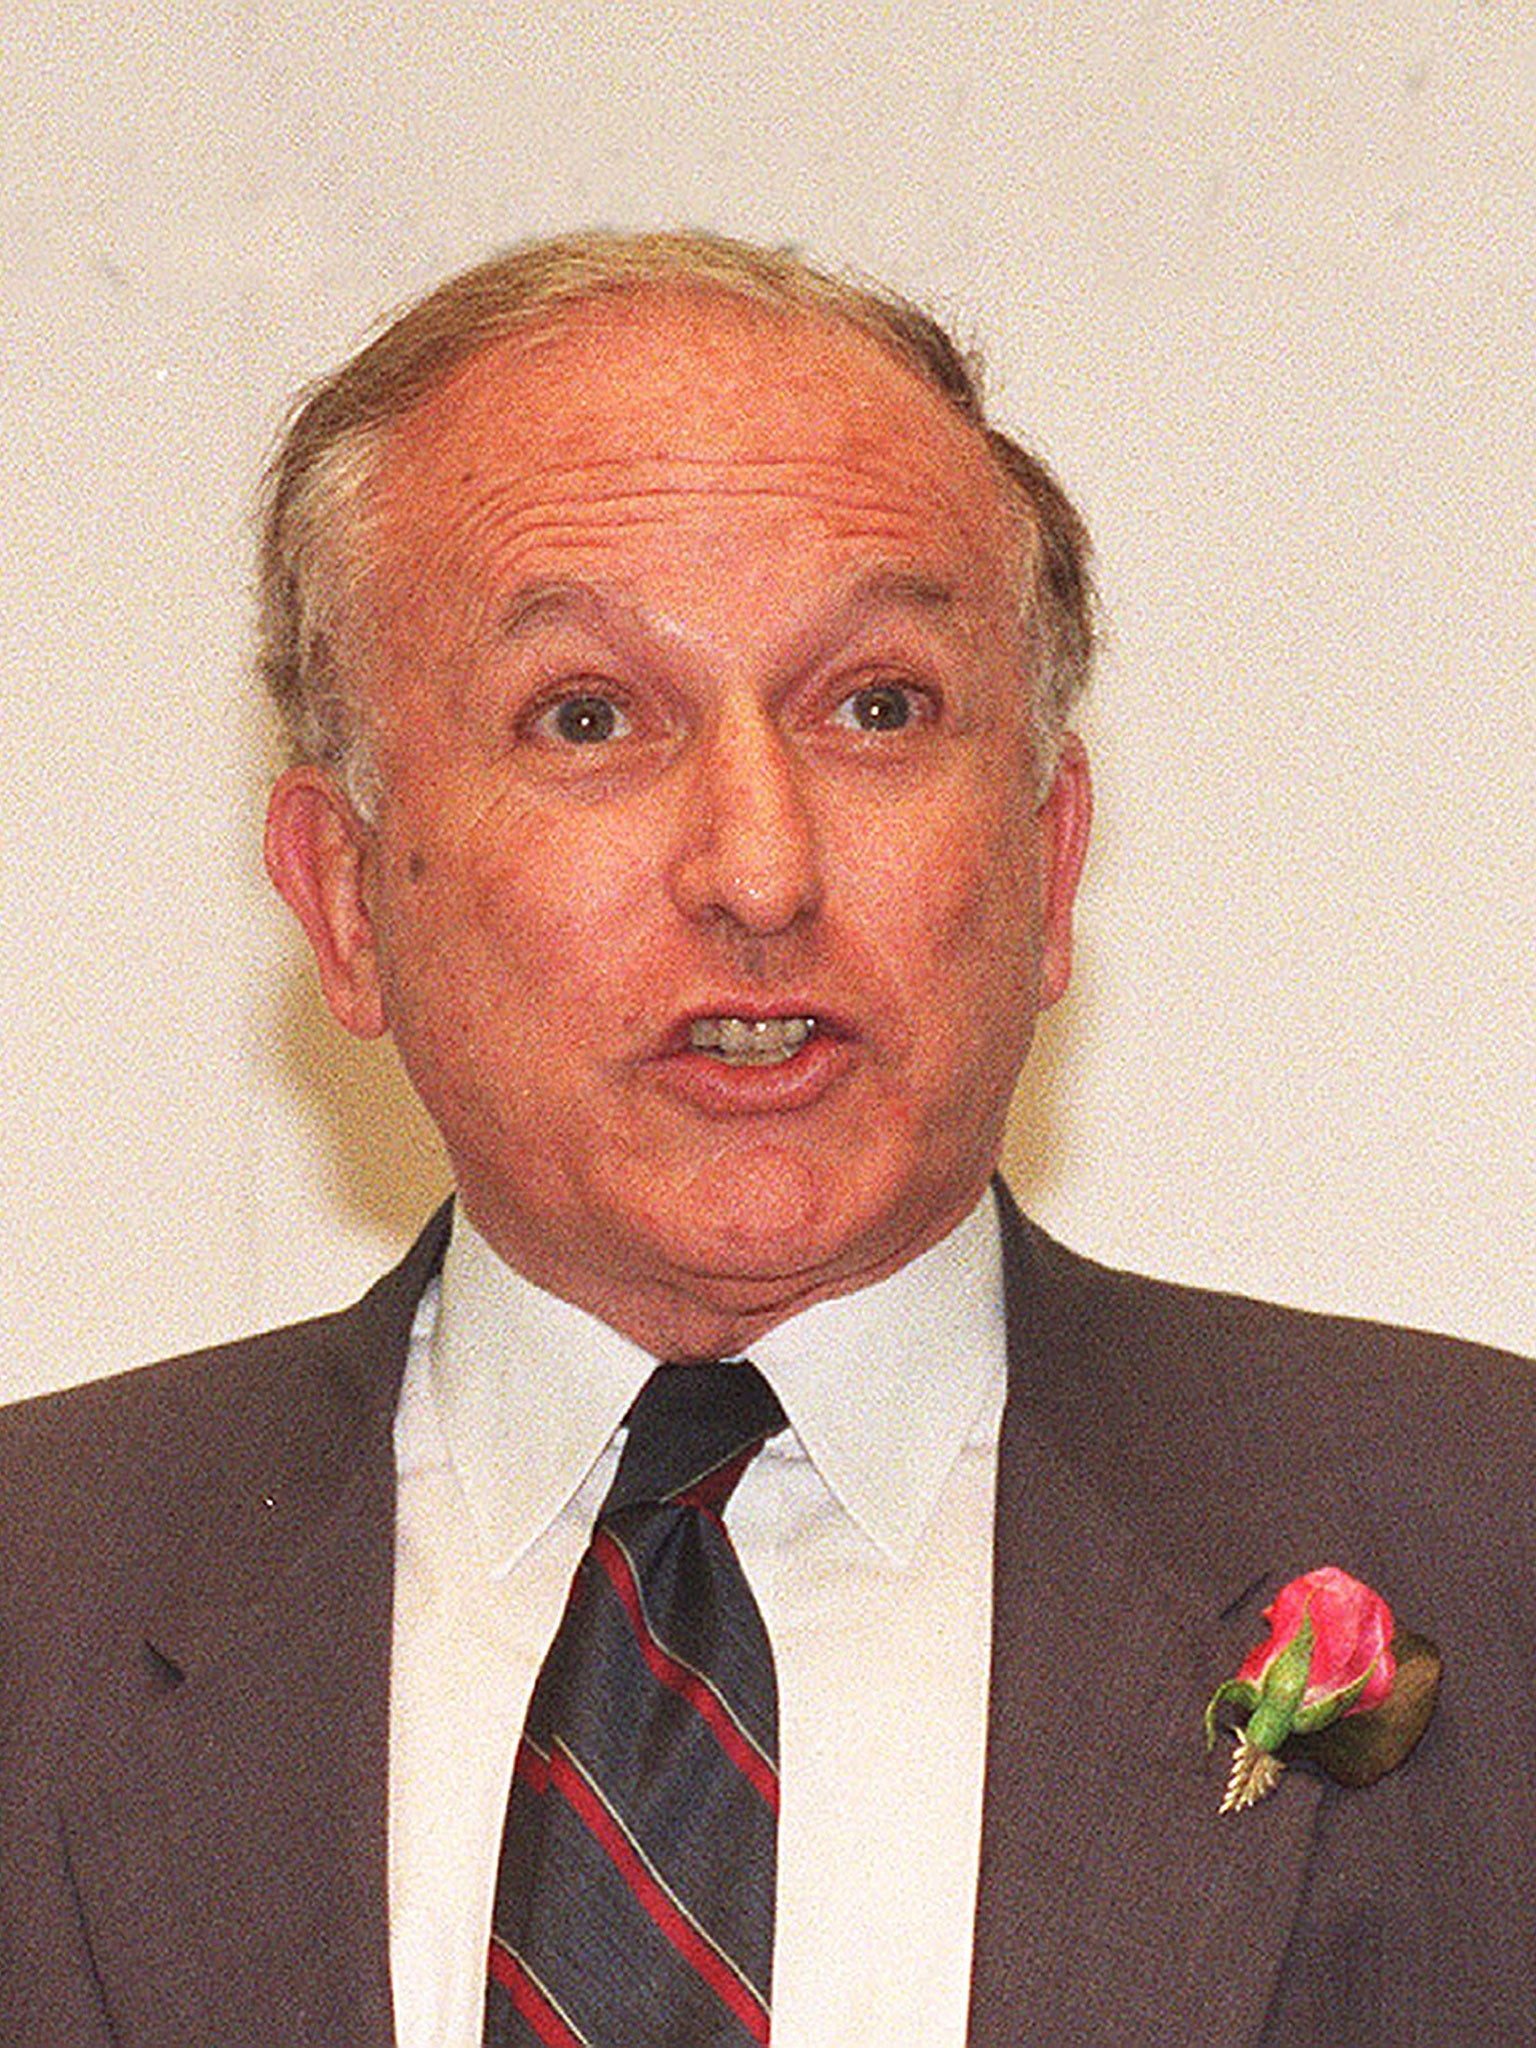 Lord Janner could be called to give evidence